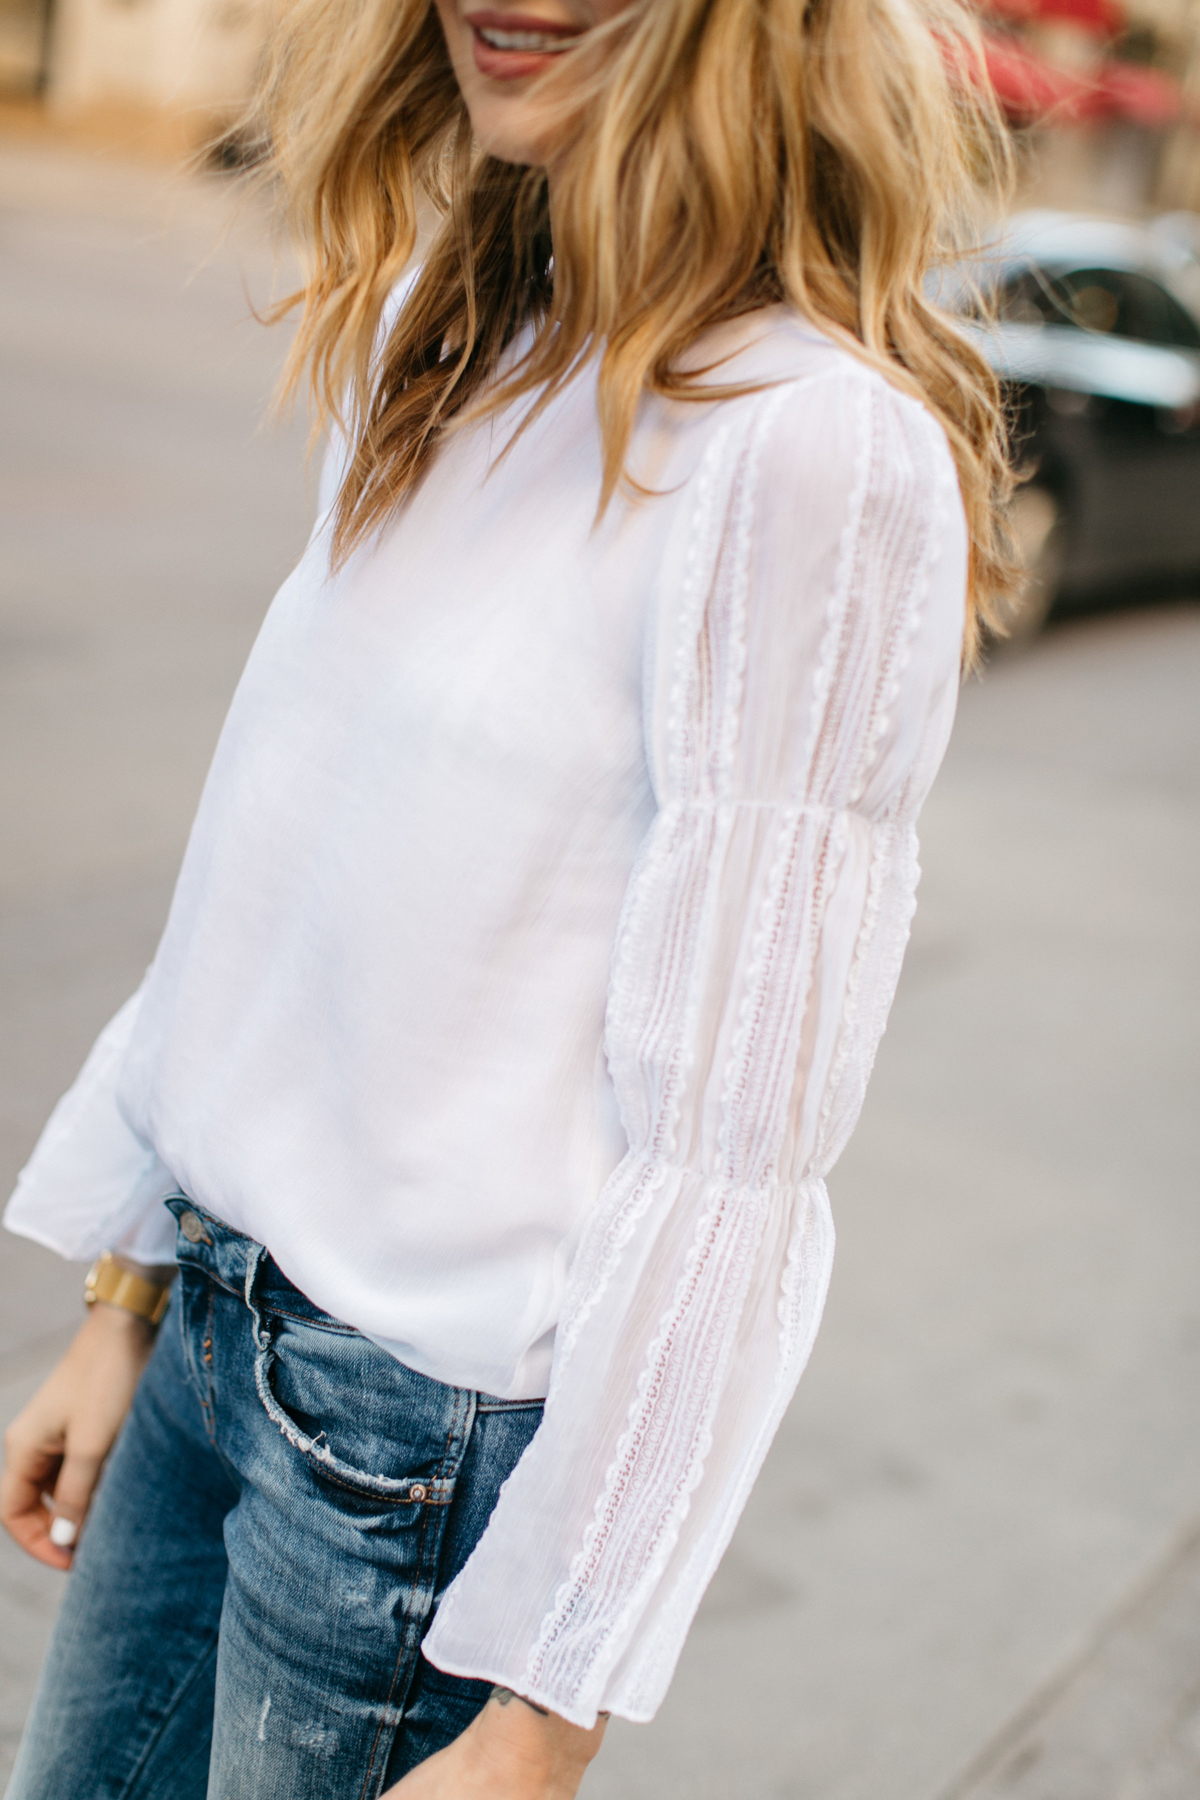 Spring Outfit, Club Monaco White Lace Top